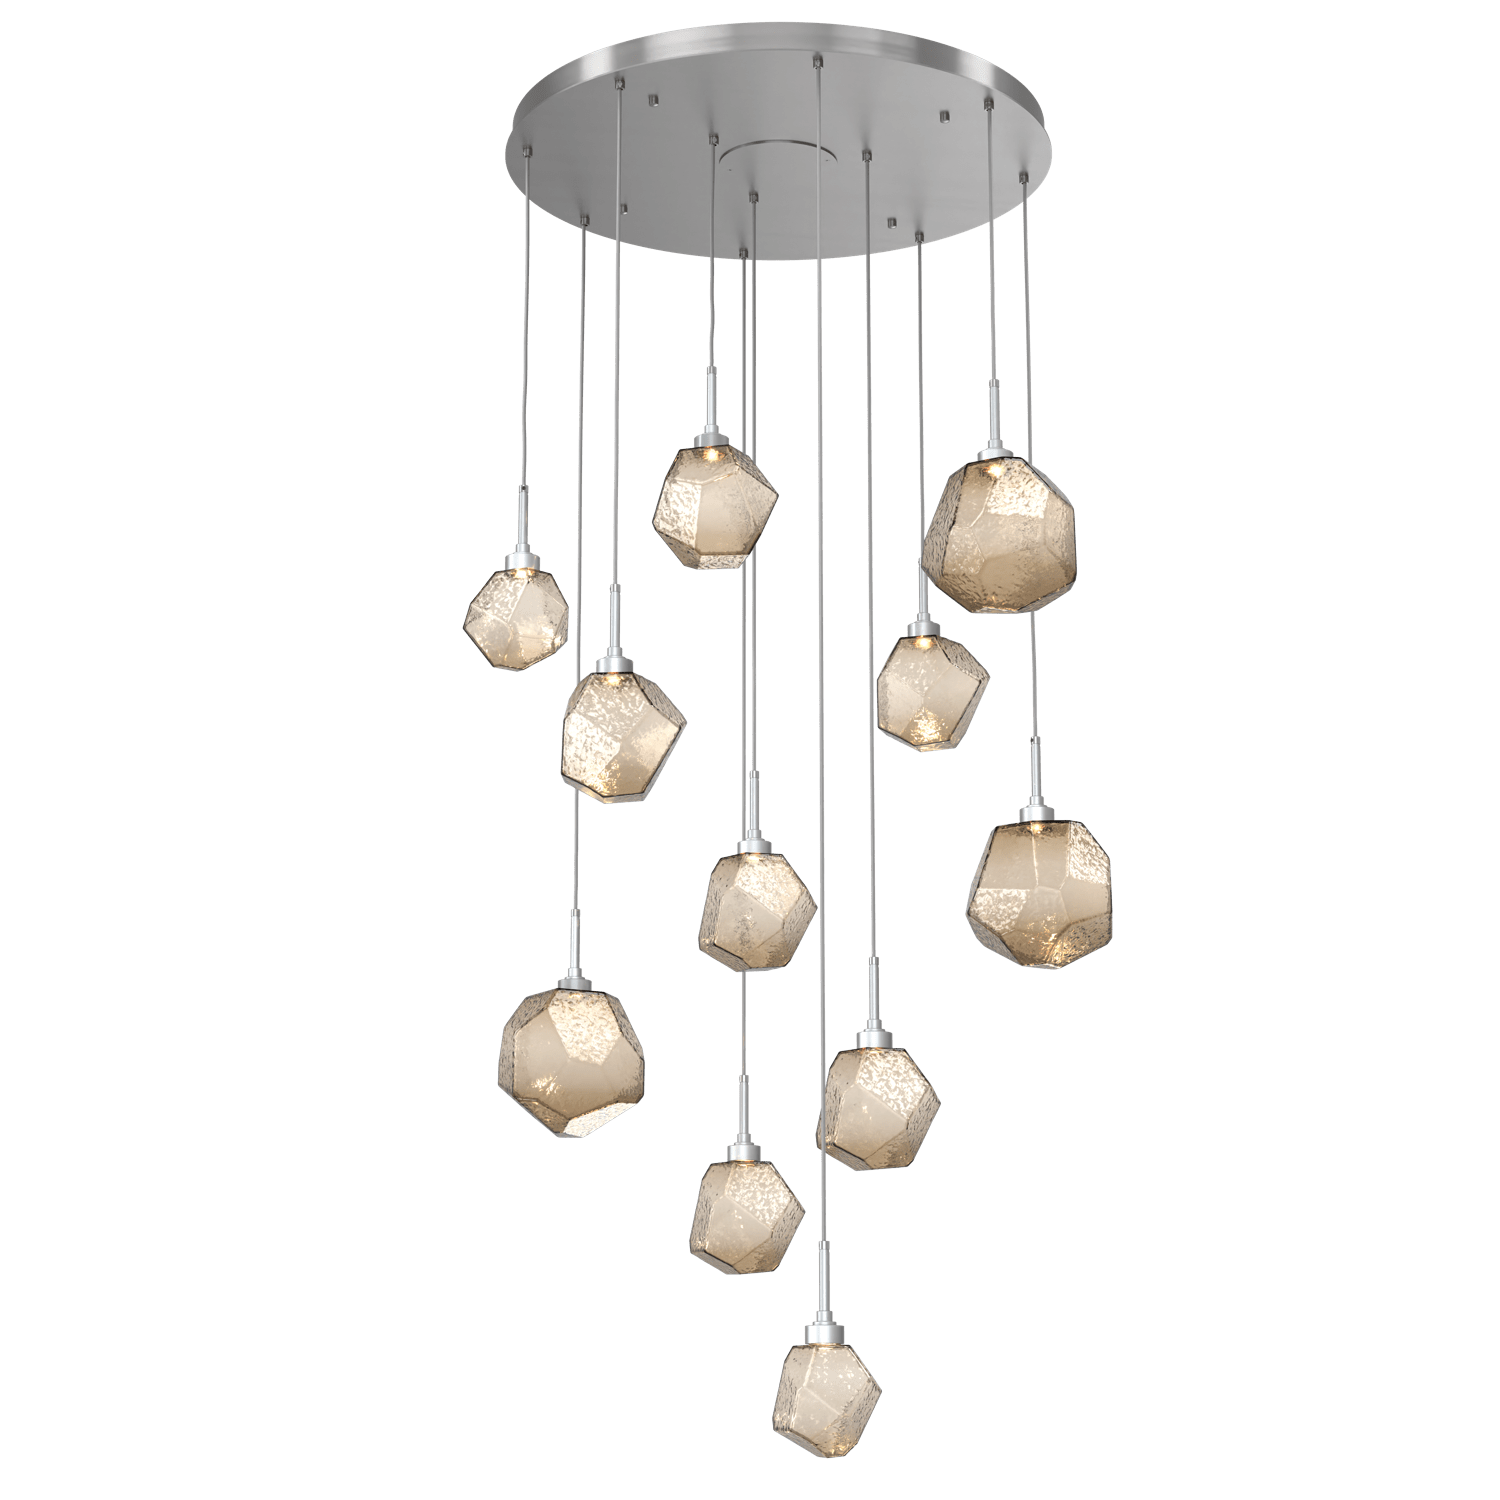 CHB0039-11-SN-B-Hammerton-Studio-Gem-11-light-round-pendant-chandelier-with-satin-nickel-finish-and-bronze-blown-glass-shades-and-LED-lamping